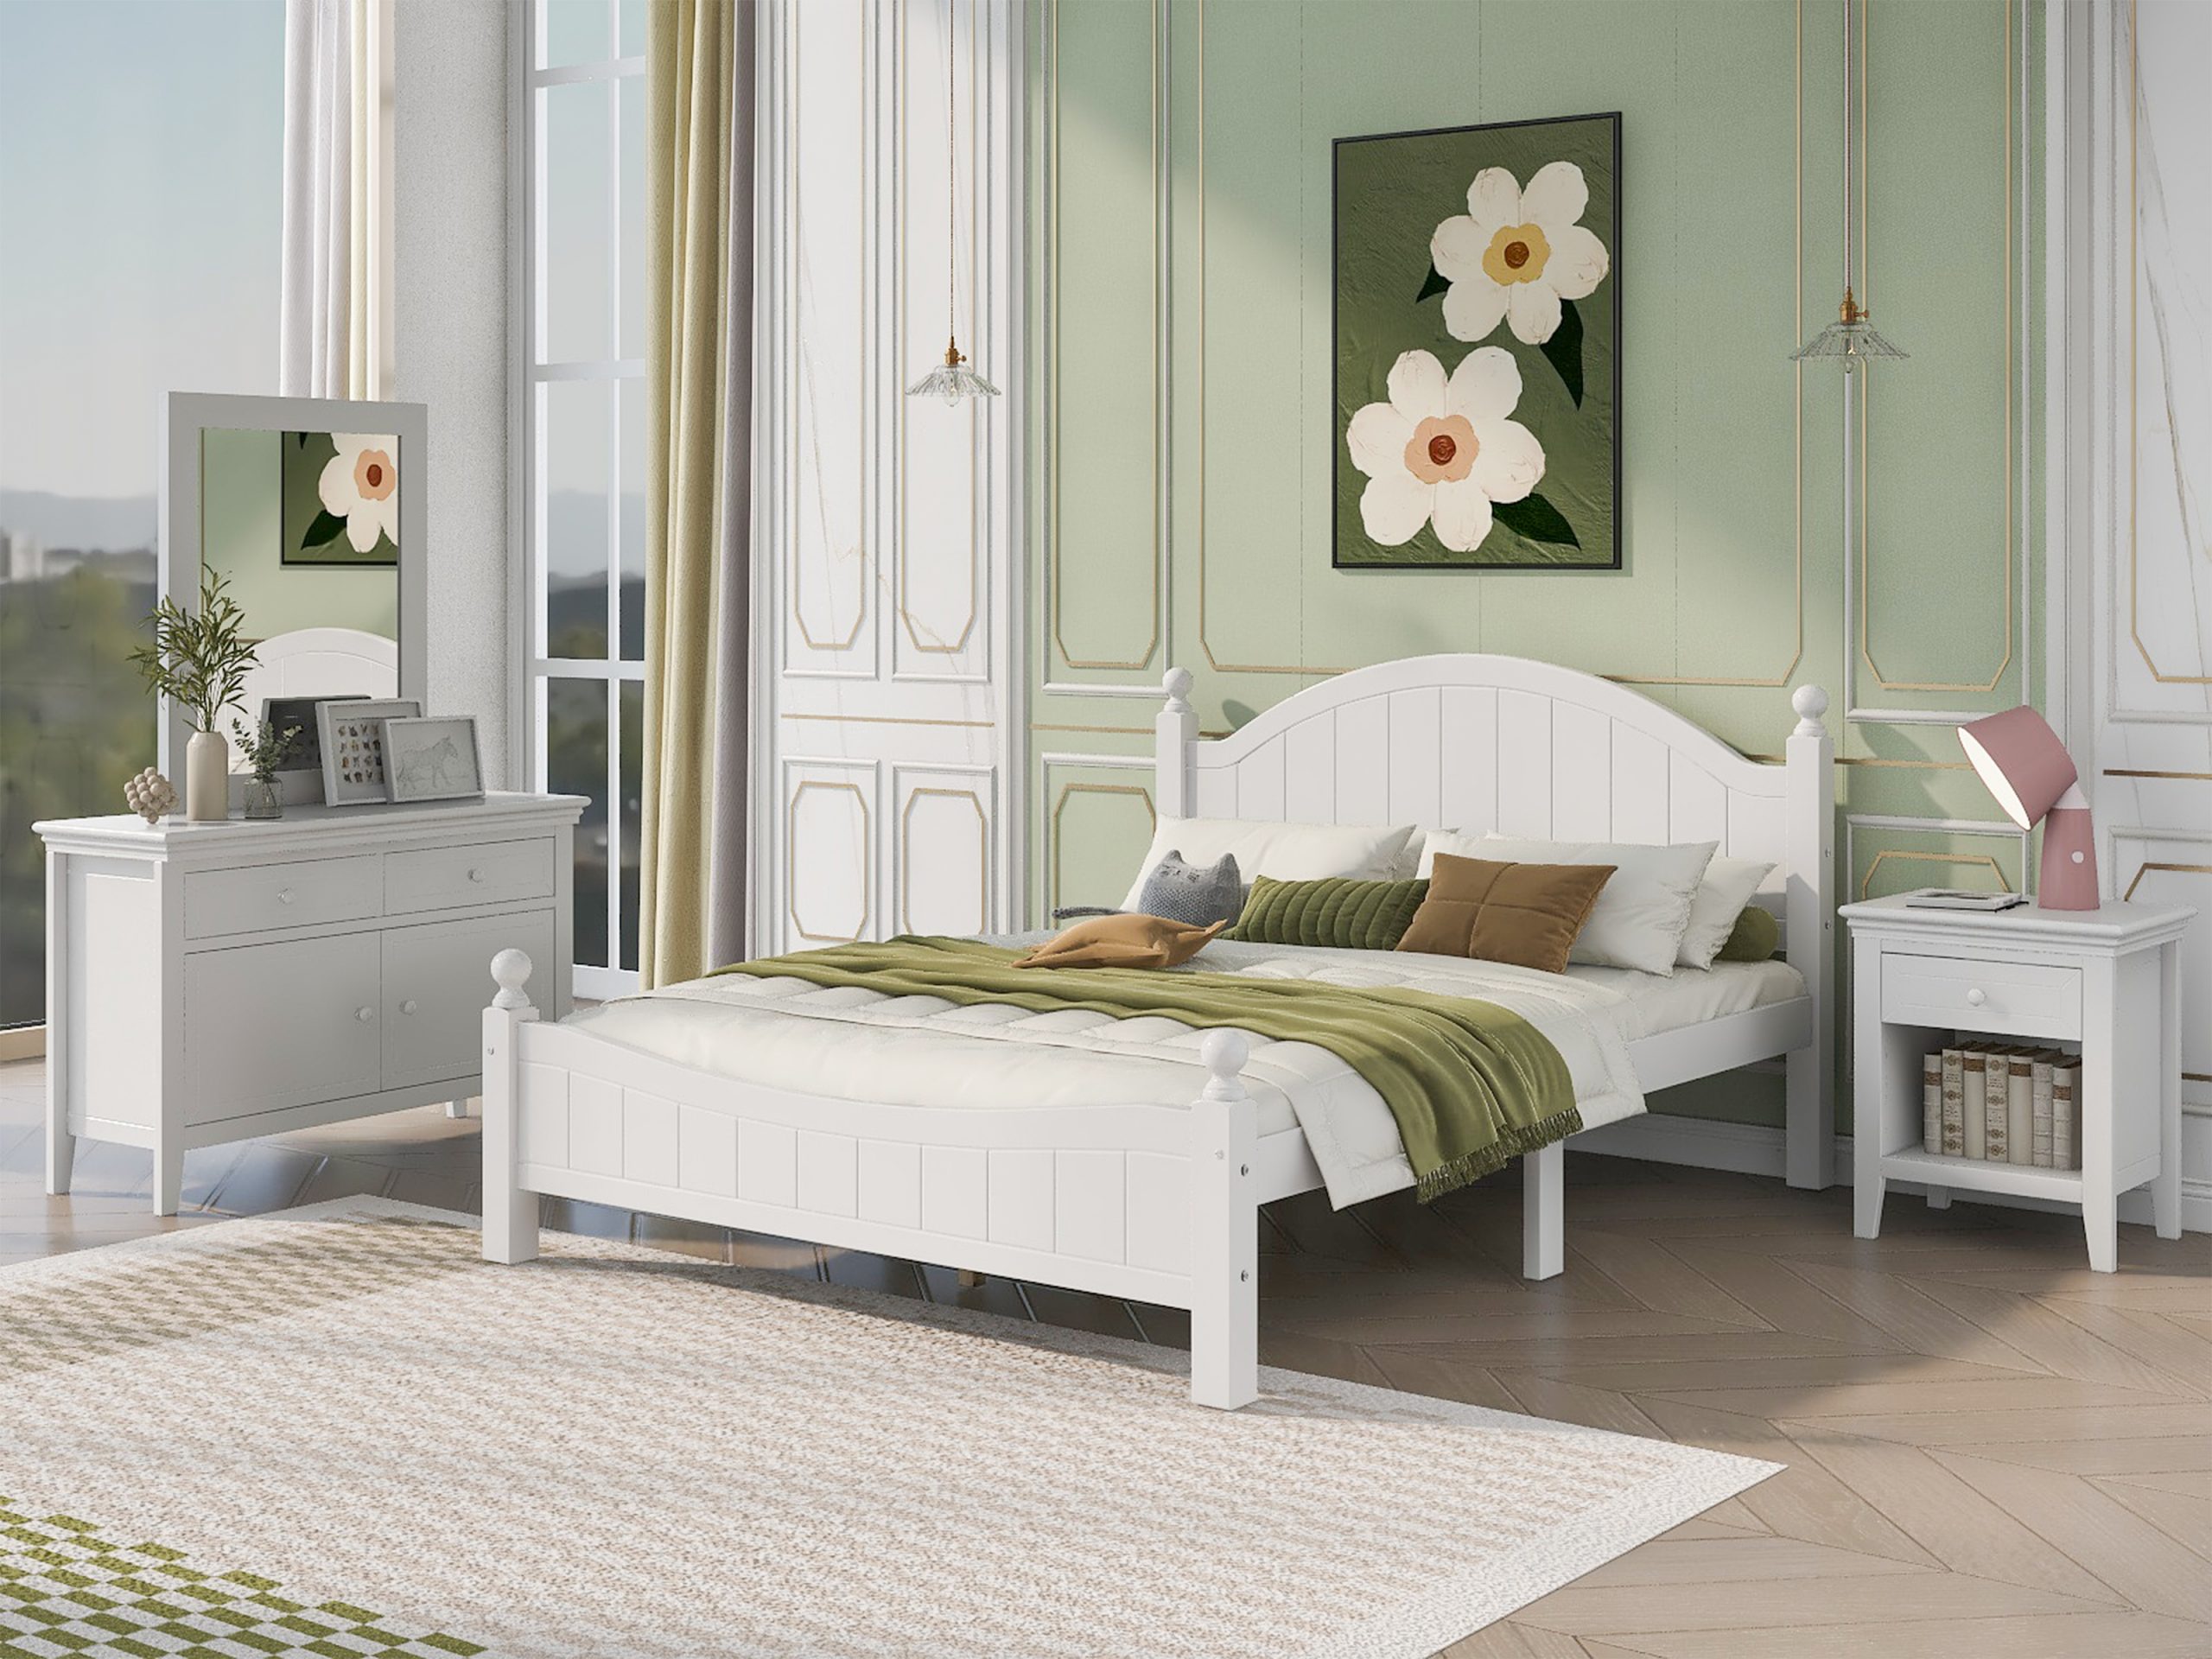 4 Pieces Traditional Concise Style Bedroom Sets, King Bed - BS400902AAA